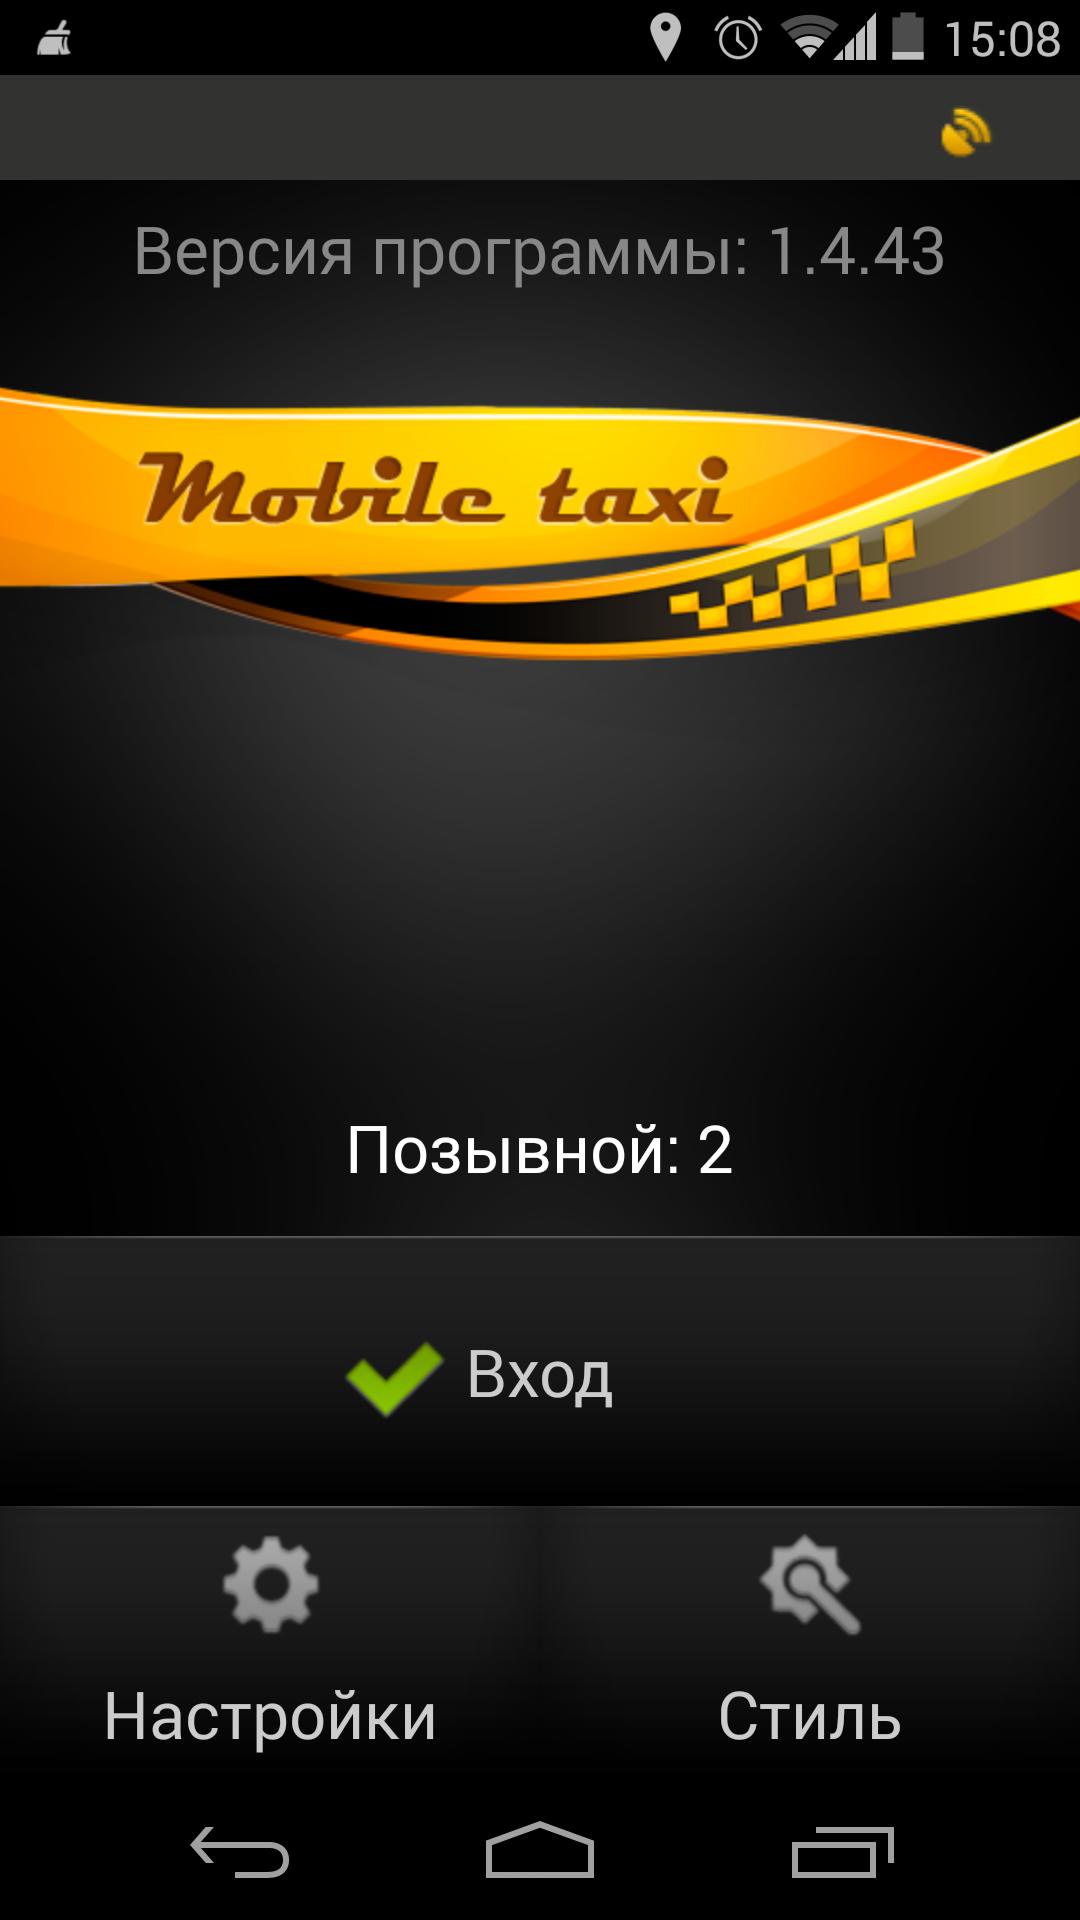 Mobile Taxi For Android - APK Download